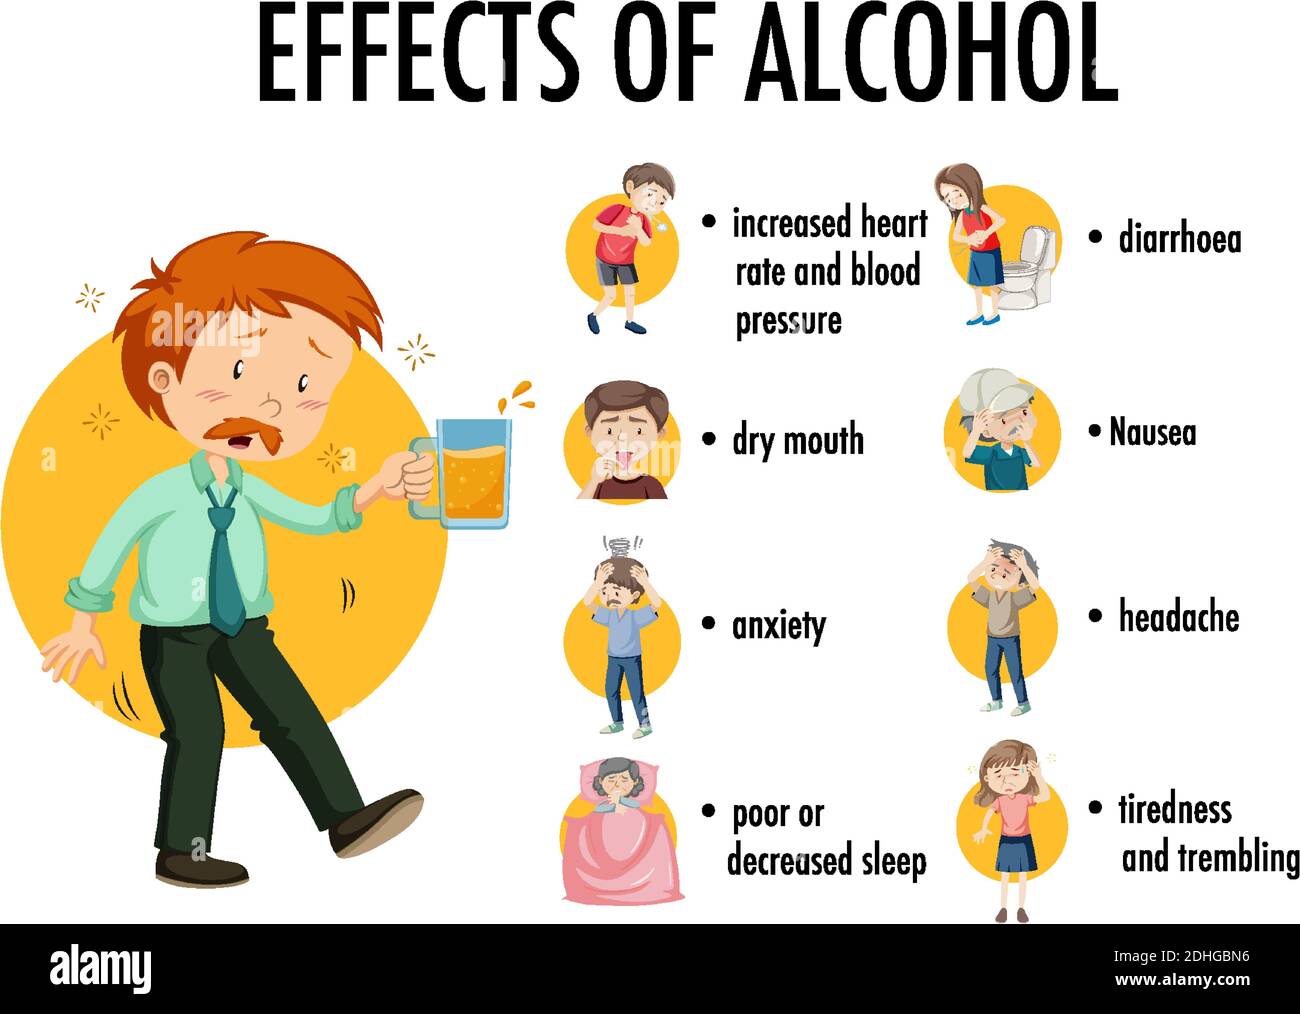 Effects of alcohol information infographic illustration Stock Vector